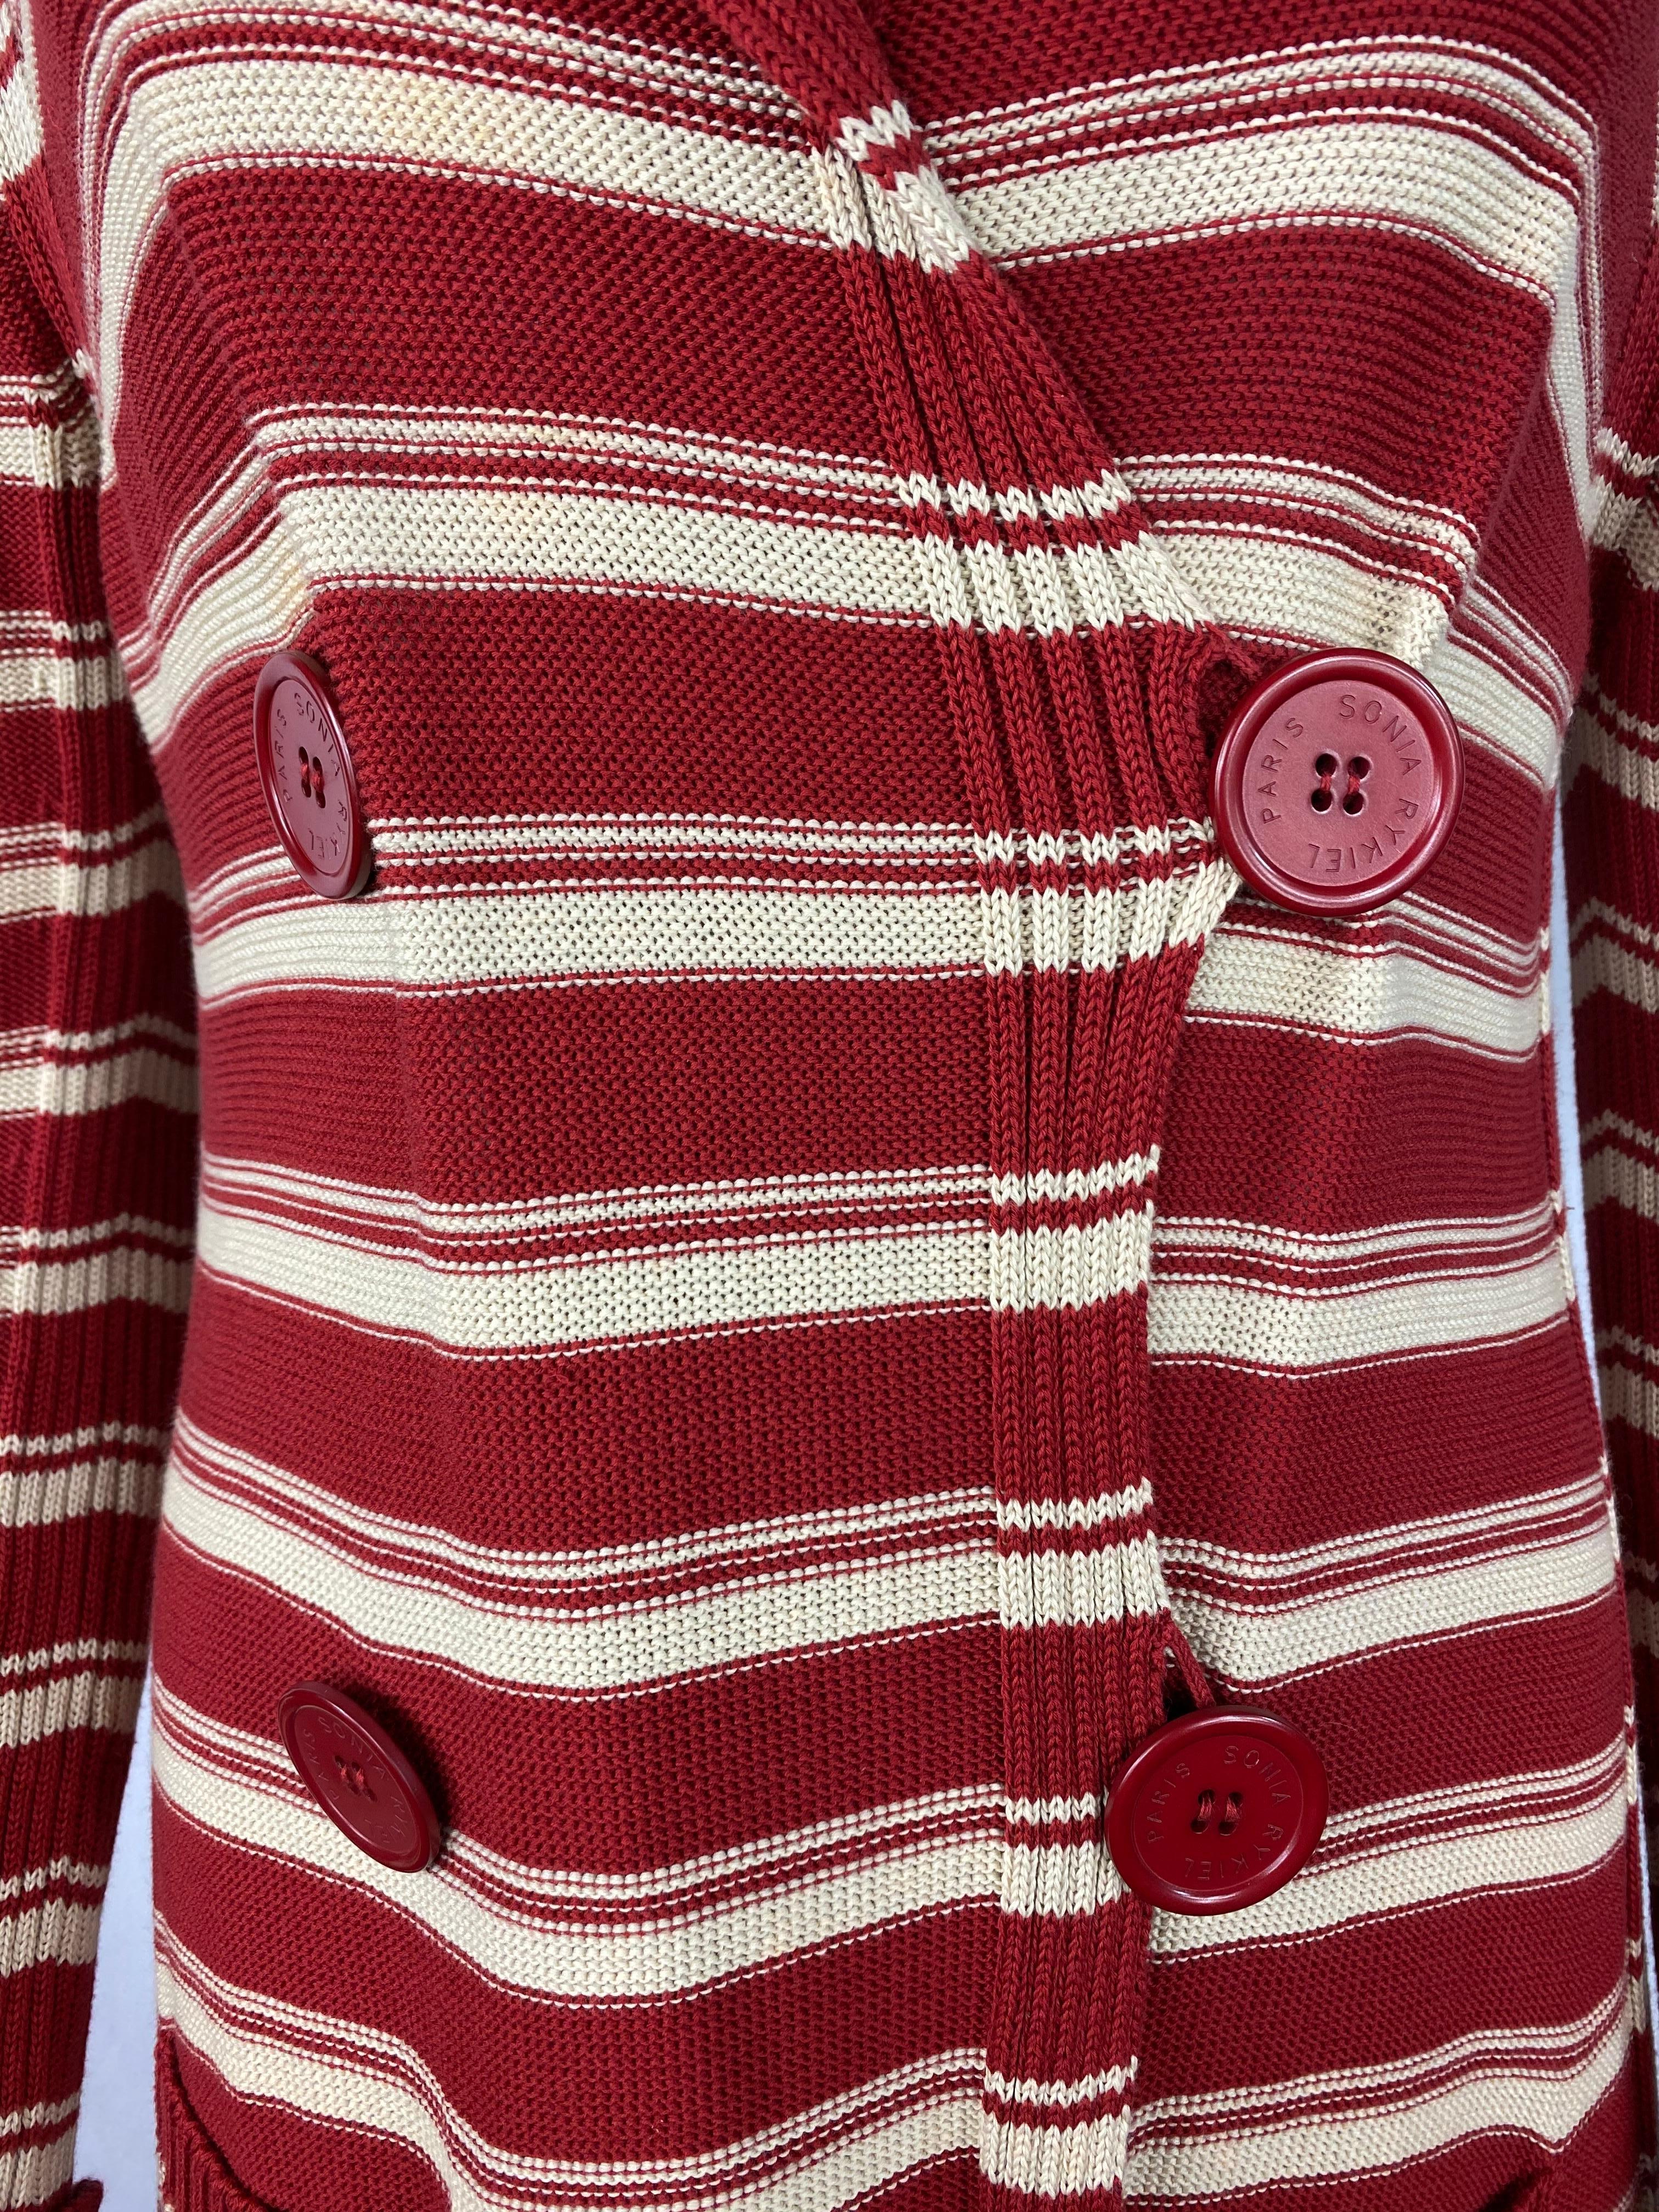 Product details:

Featuring 100% cotton, red and white stripped pattern design with collar, front dual pockets, front four large and red buttons signed with Sonia Rykiel Paris, mid length.
Made in Italy.